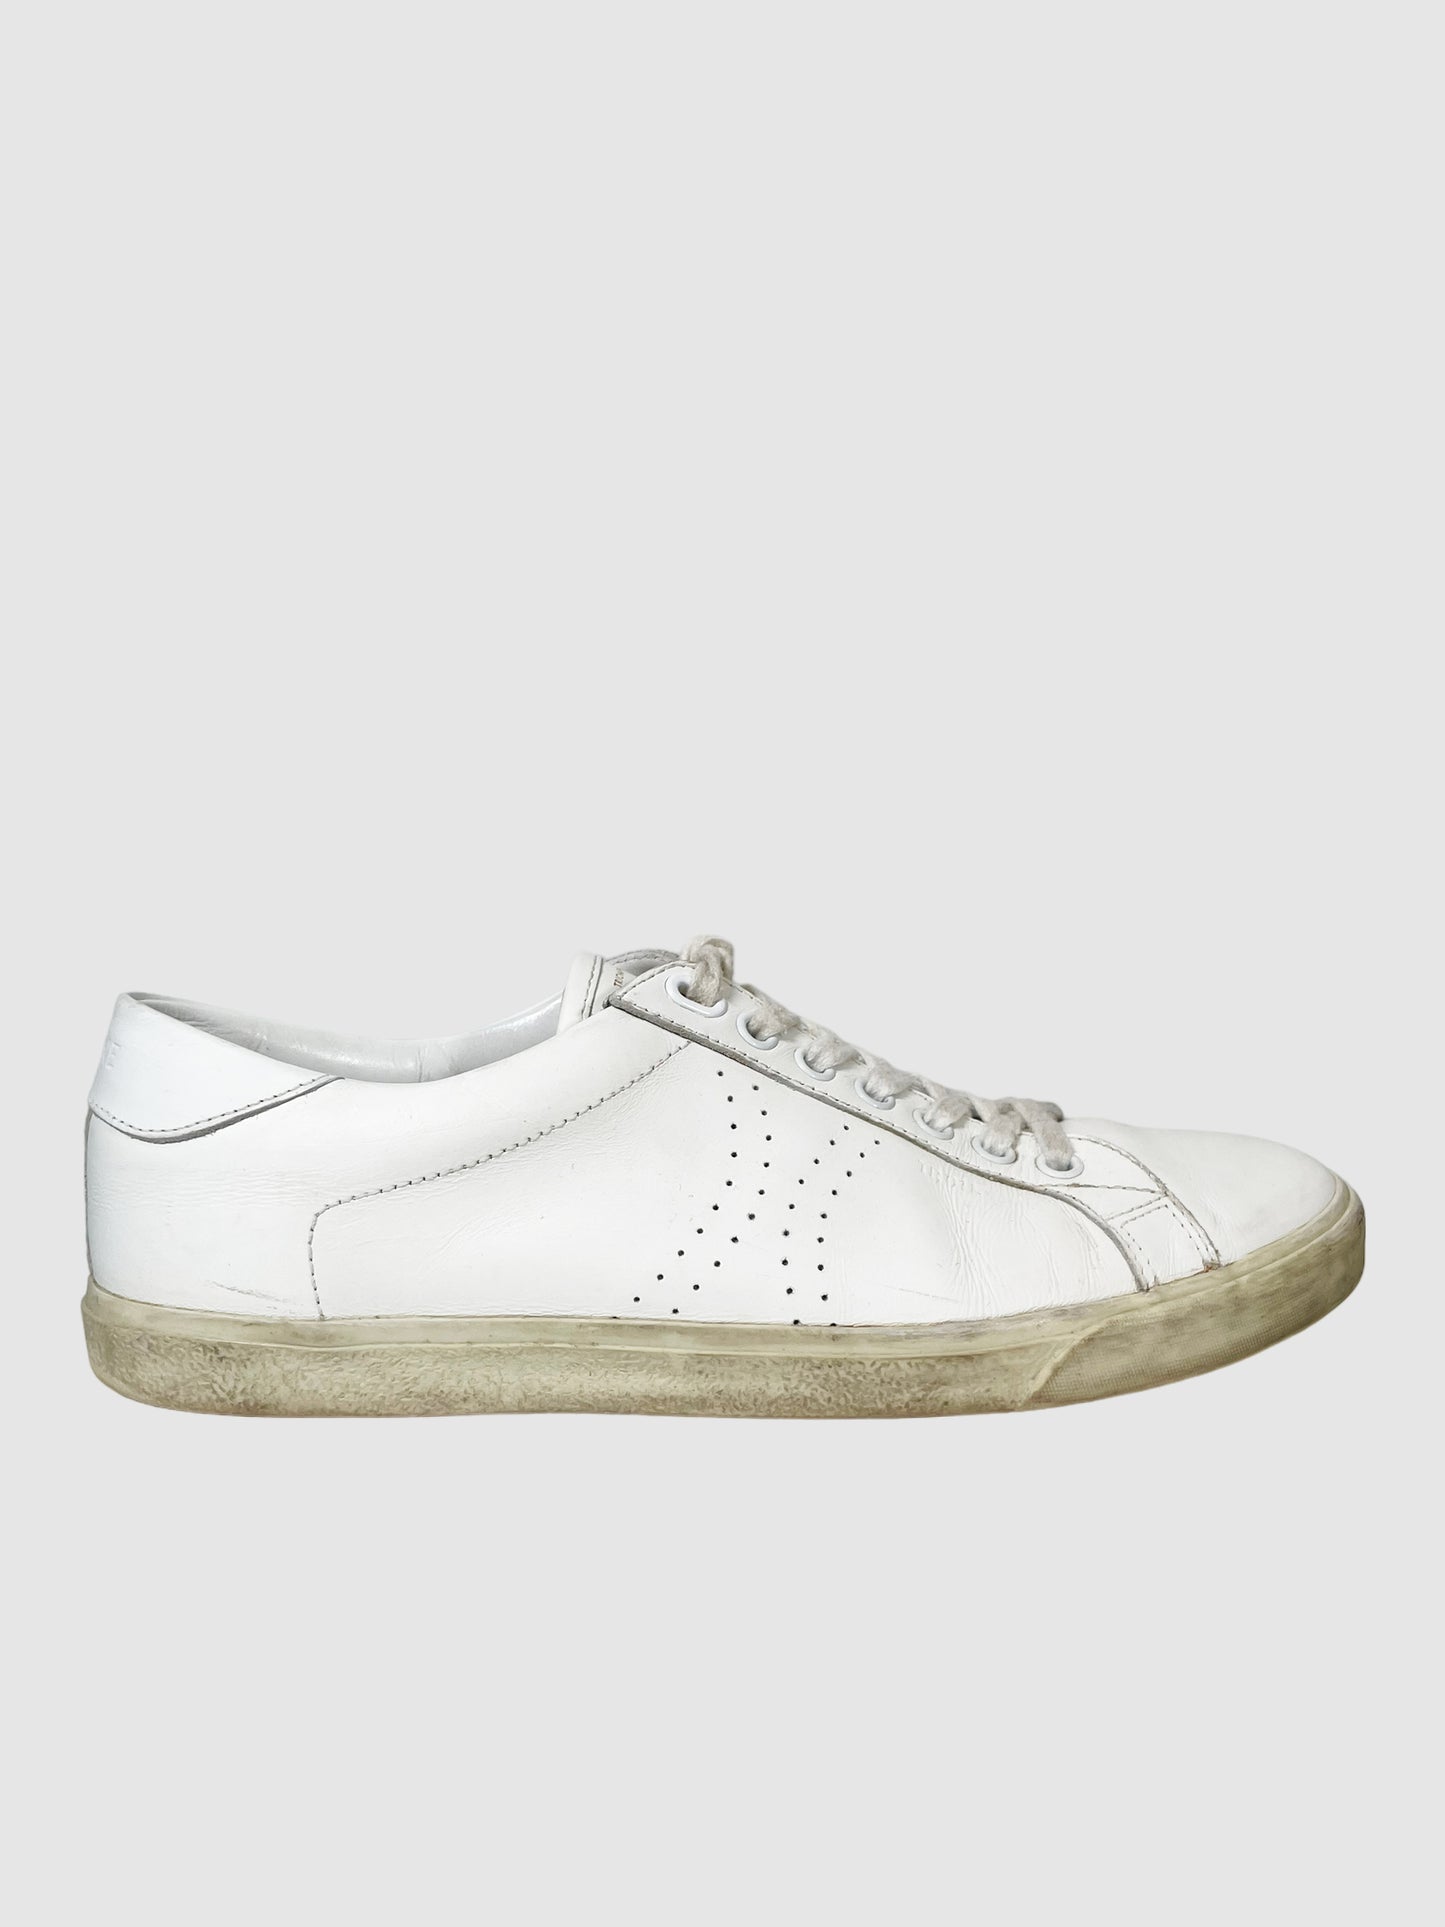 Celine 'Triomphe' Leather Sneakers - Size 39